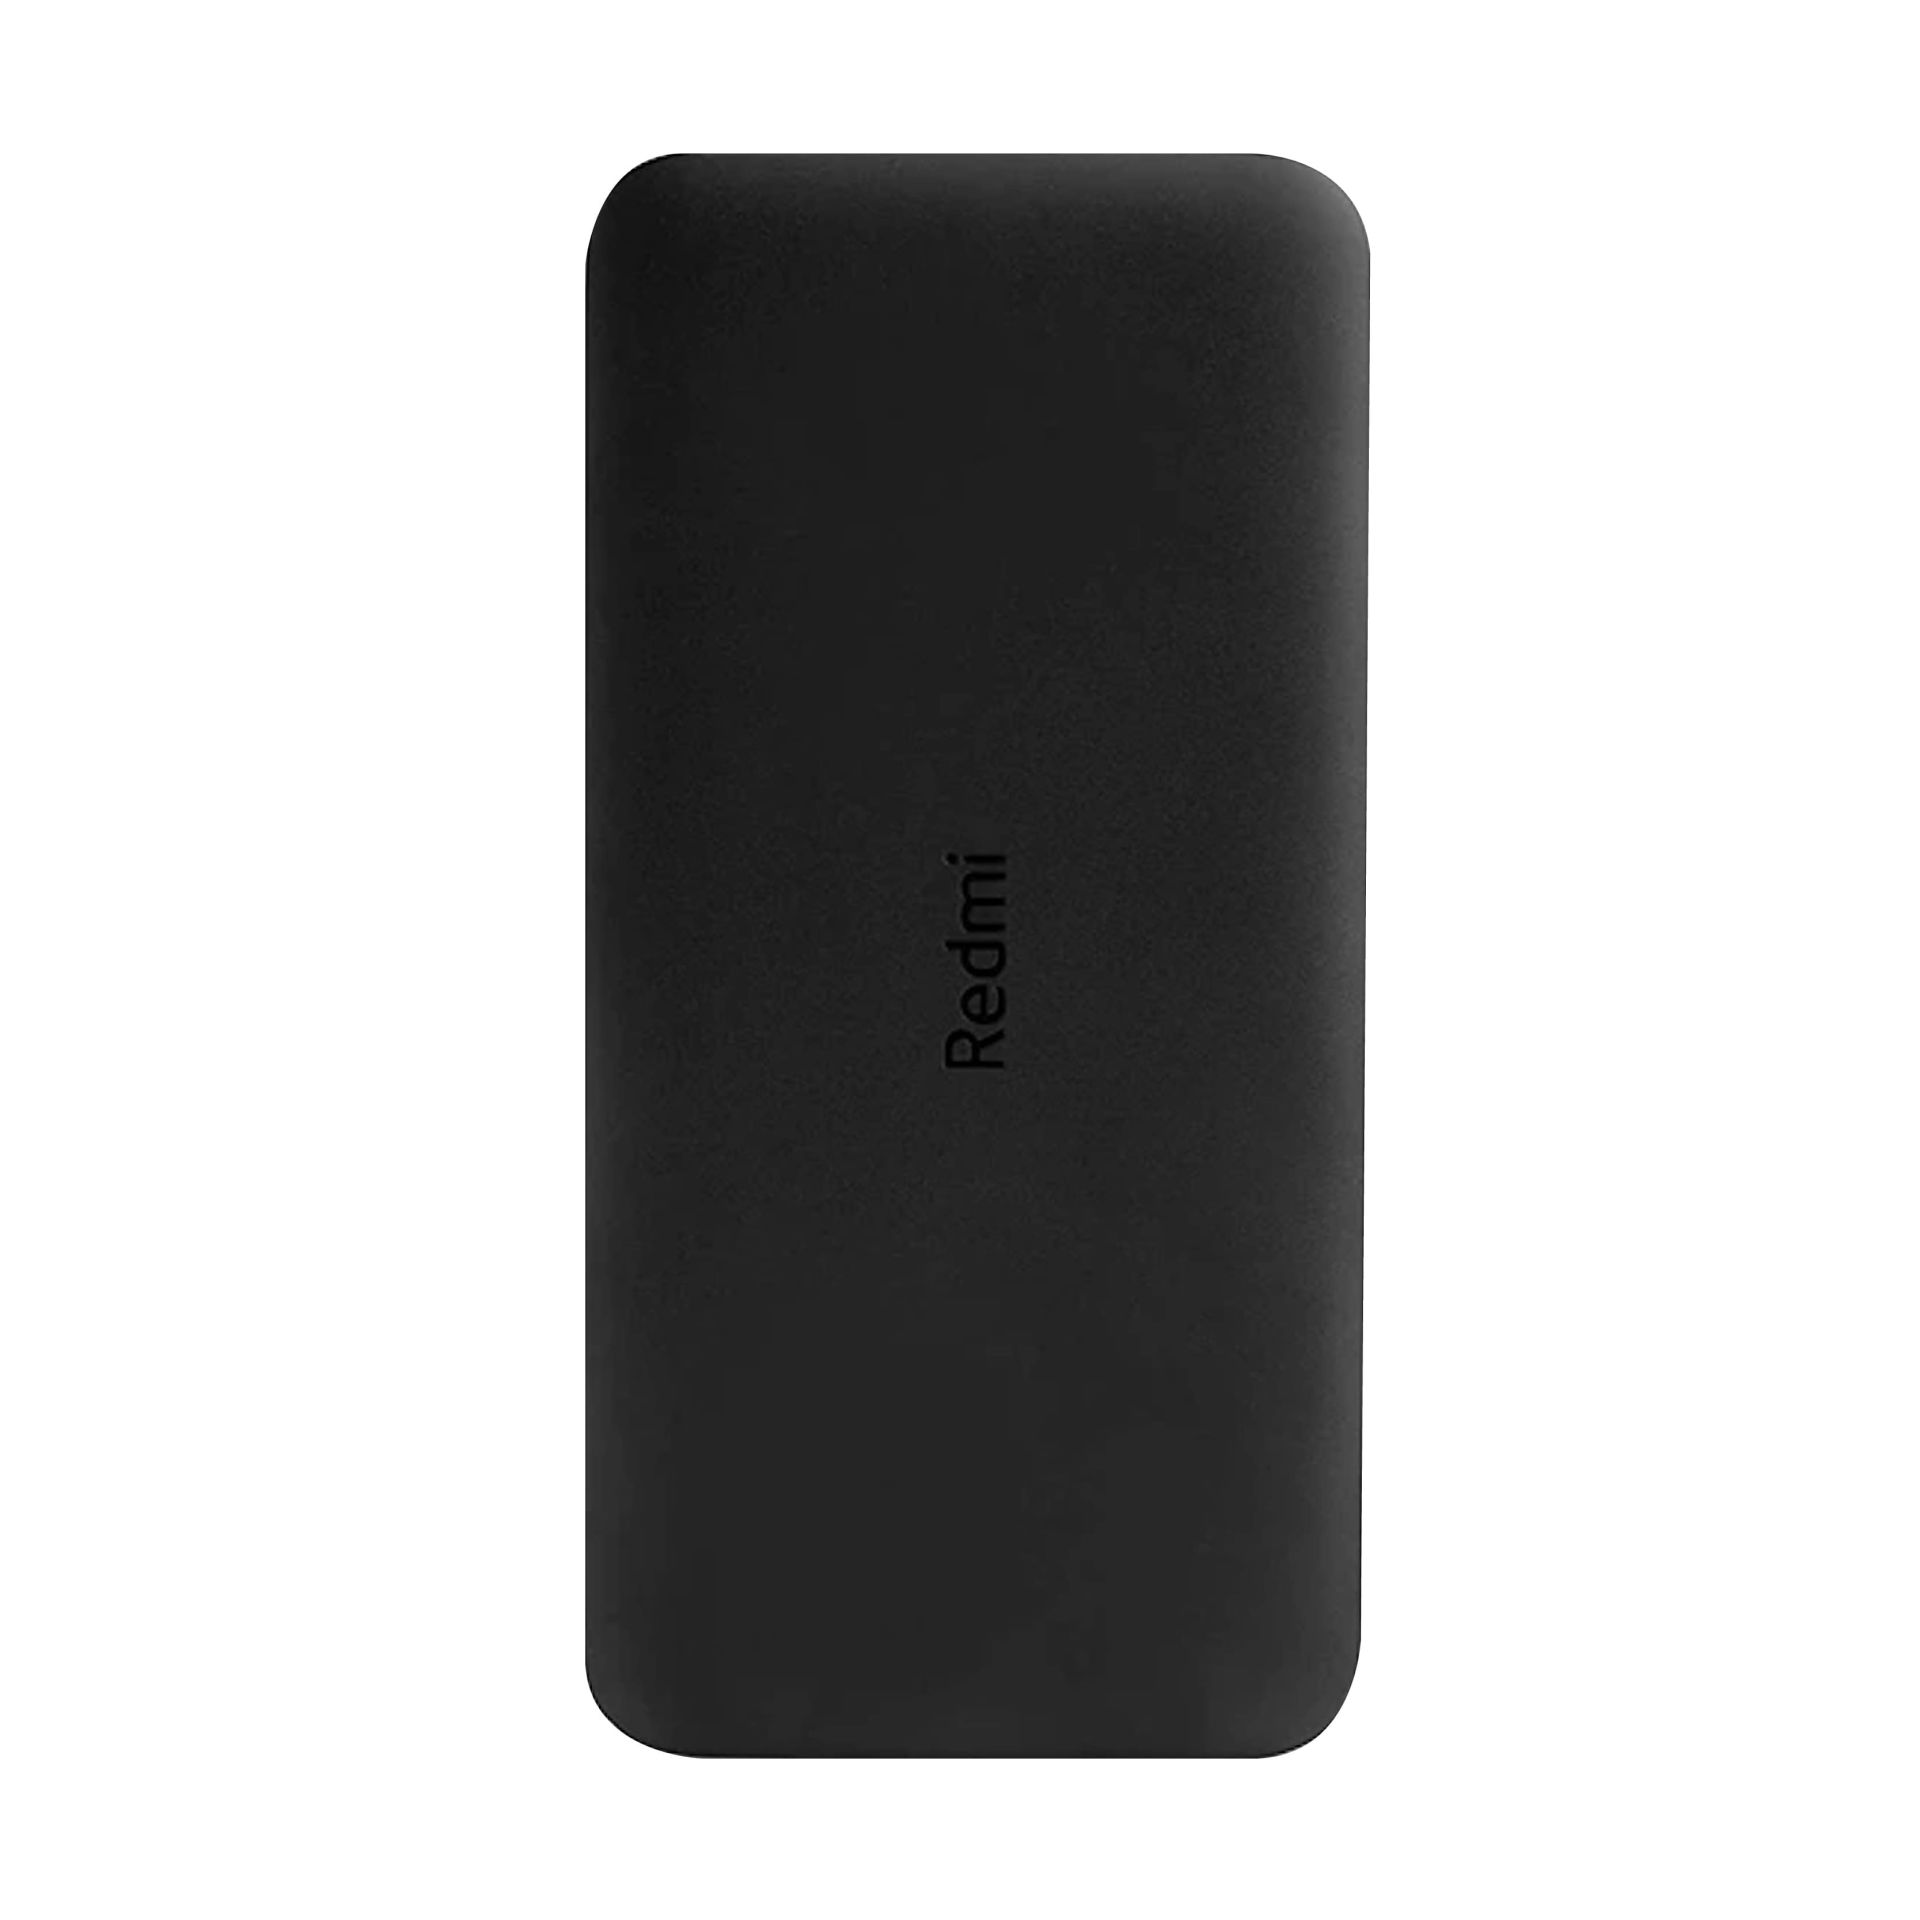 Redmi Power Bank 20000 mAh fast charge